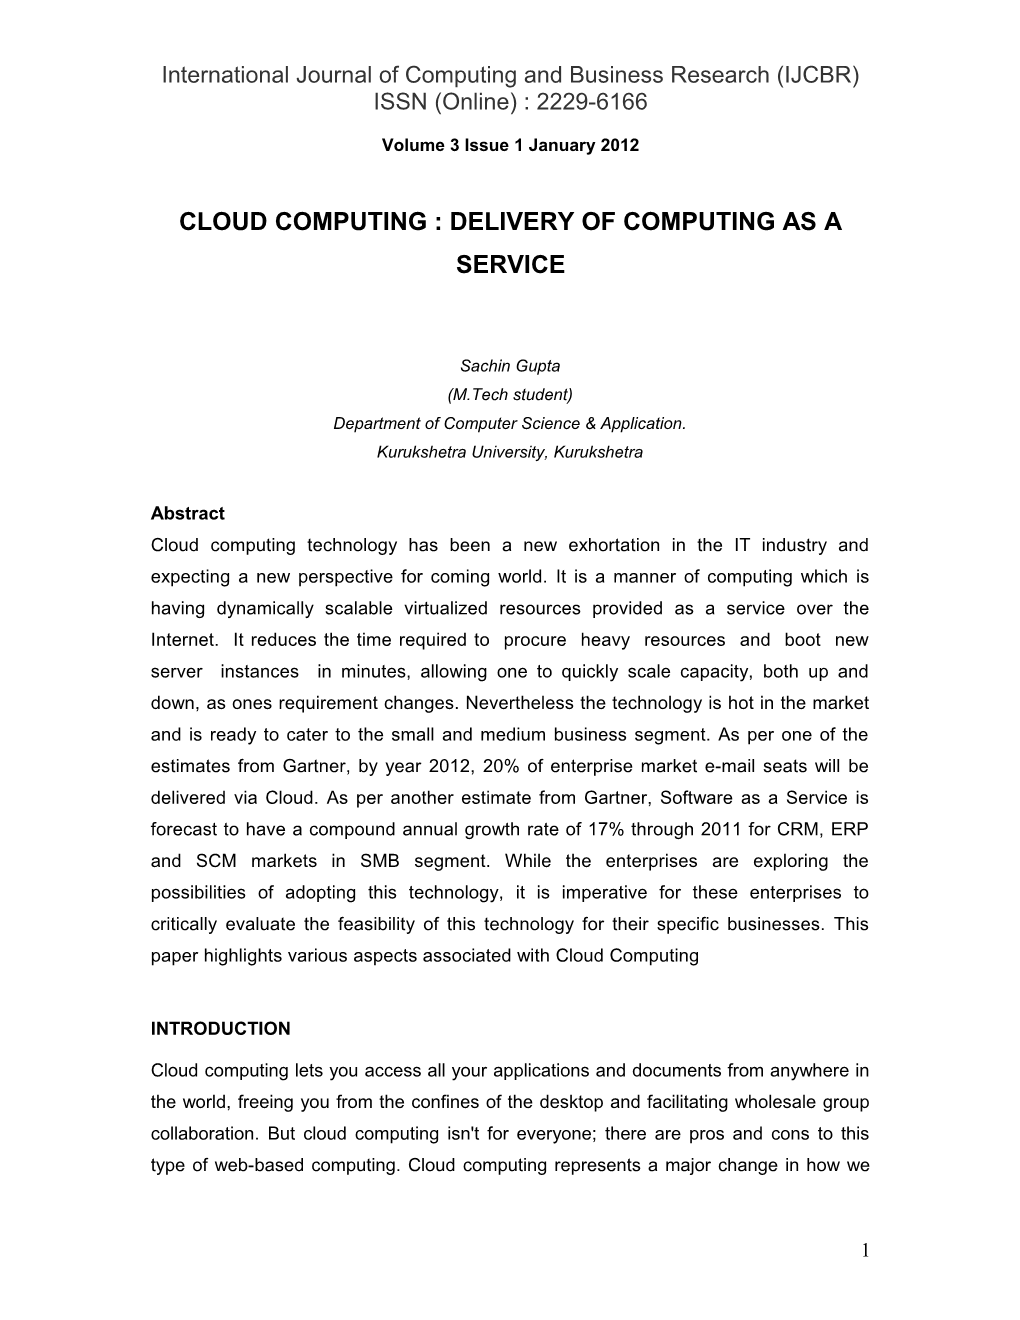 Cloud Computing Indian Rural Business Opportunities